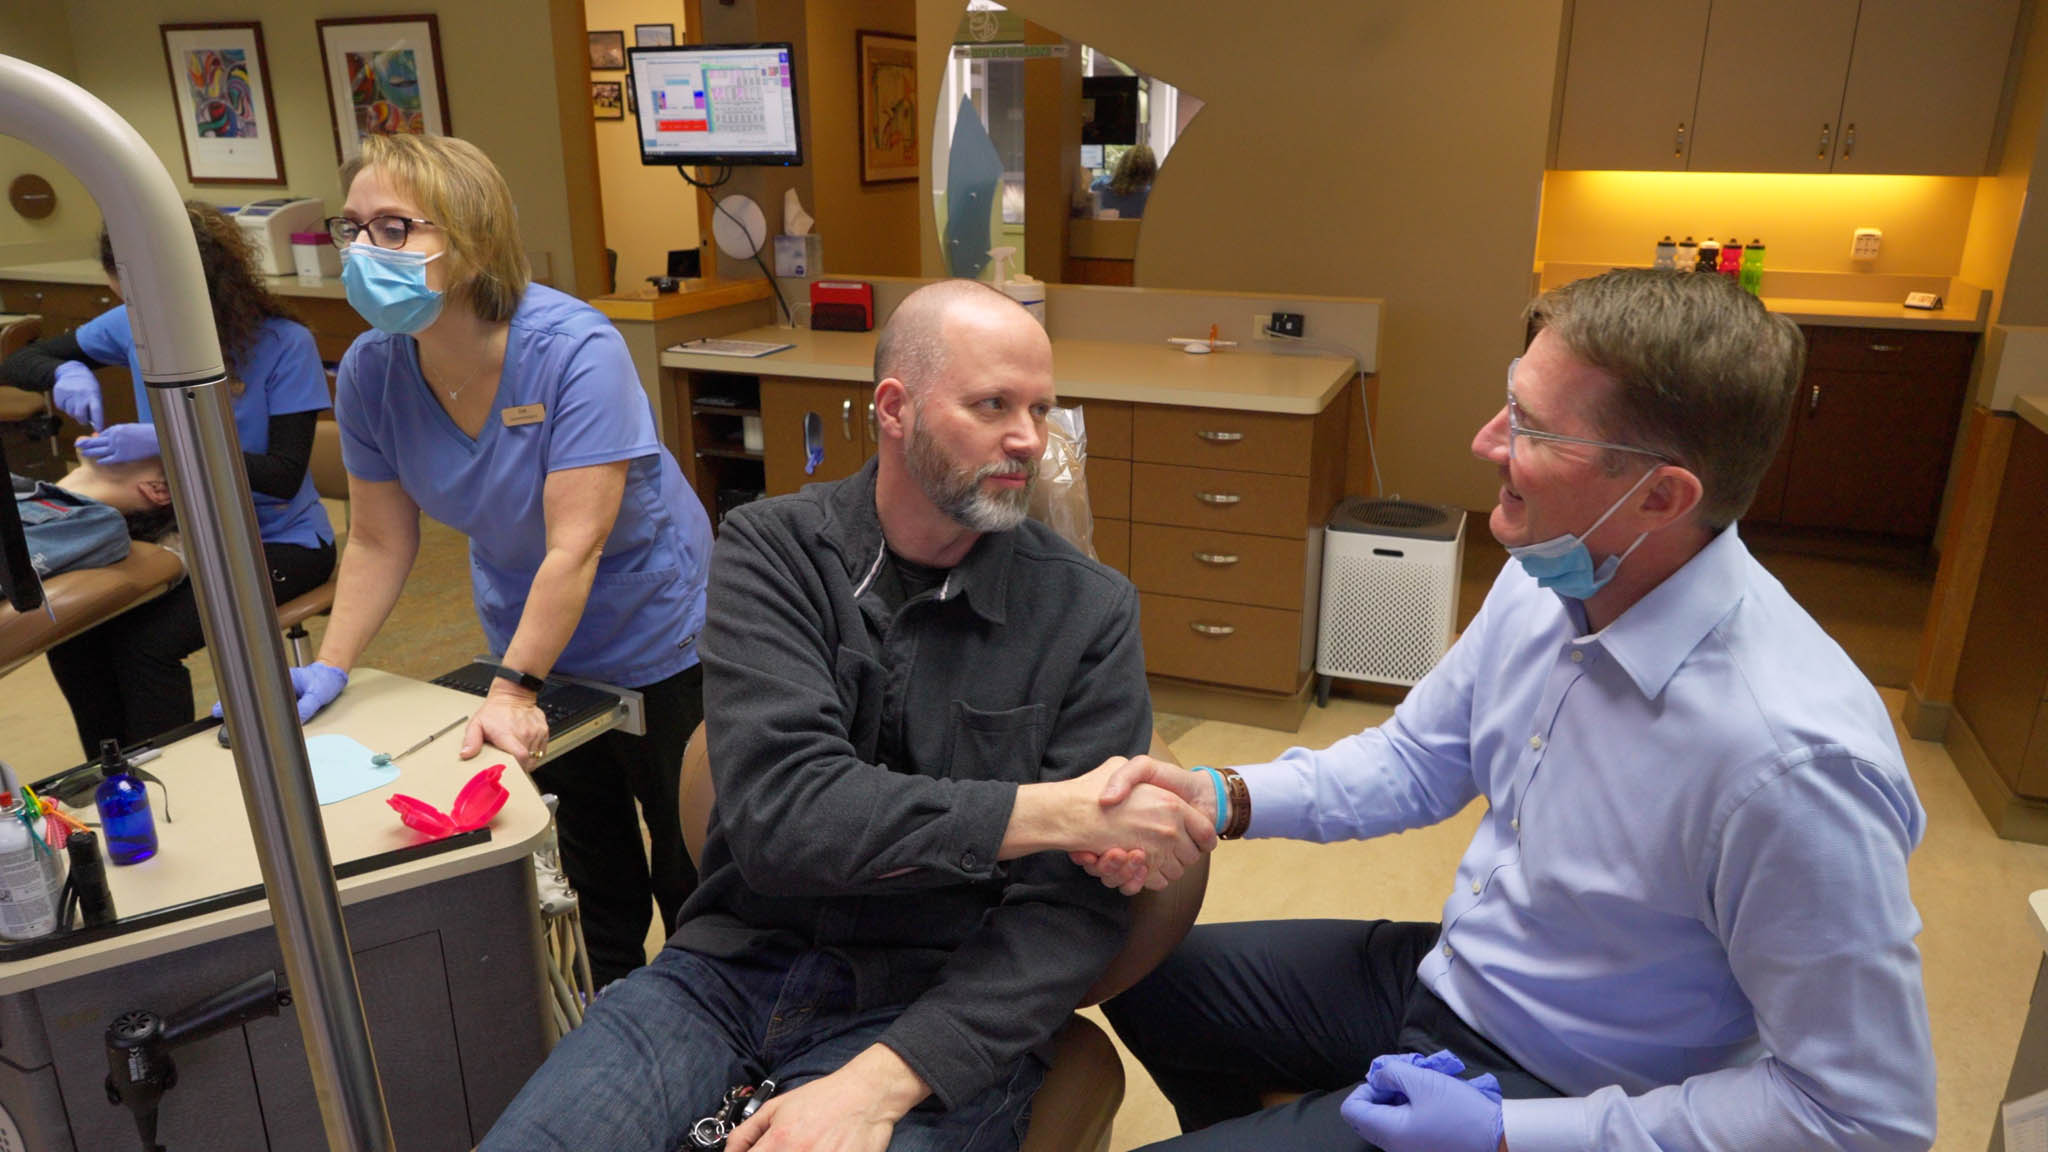 Shaking hands with Dr. Roos - Roos Orthodontics